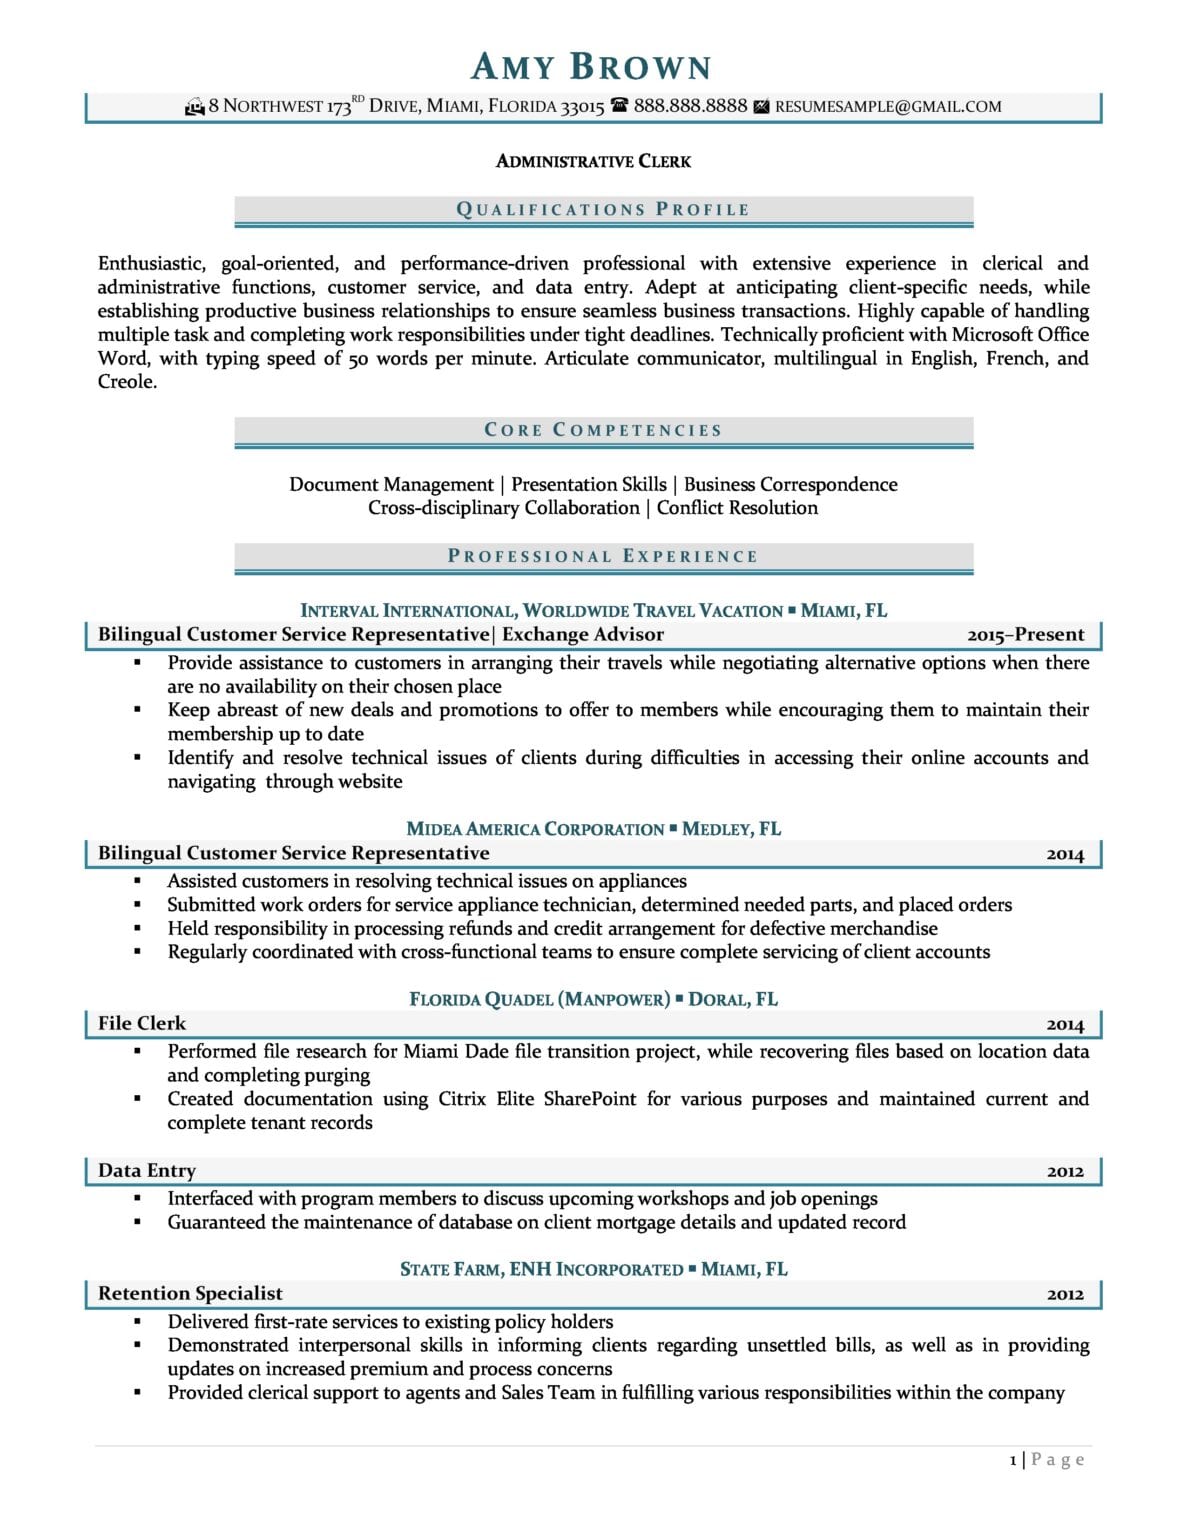 resume summary examples for administration